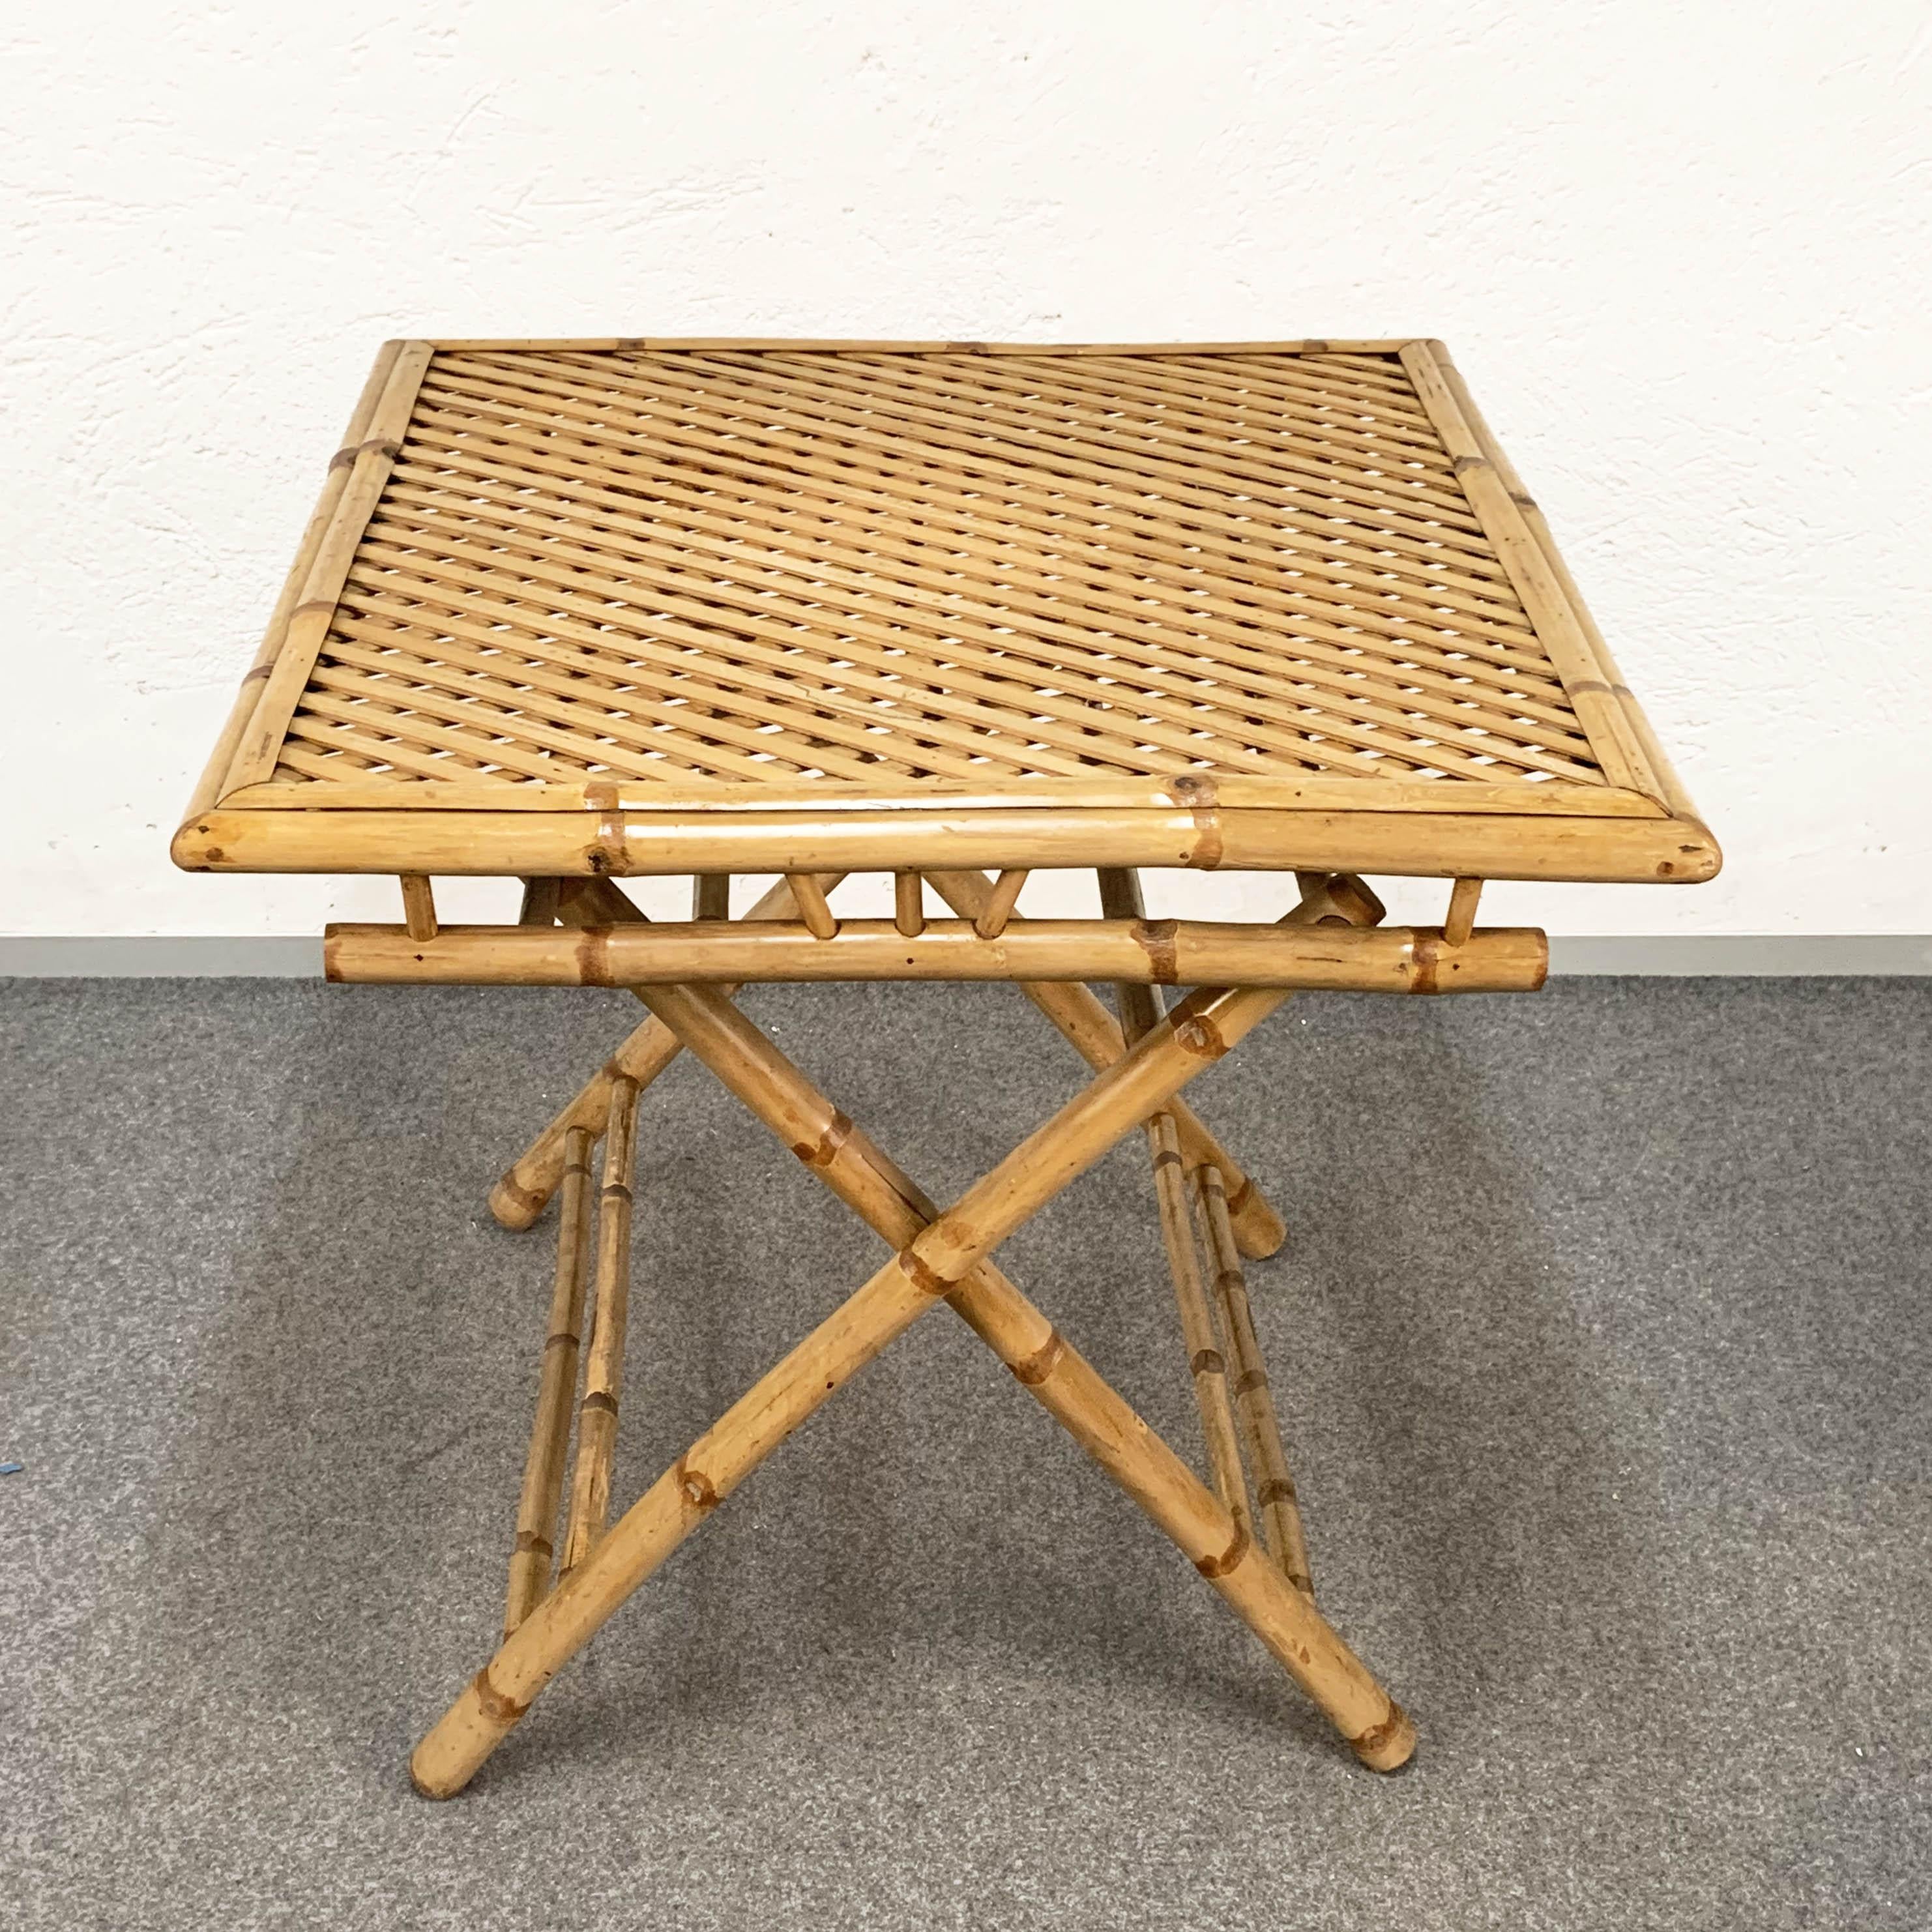 Midcentury Bamboo and Rattan Italian Foldable Table and Four Chairs, 1960s For Sale 5